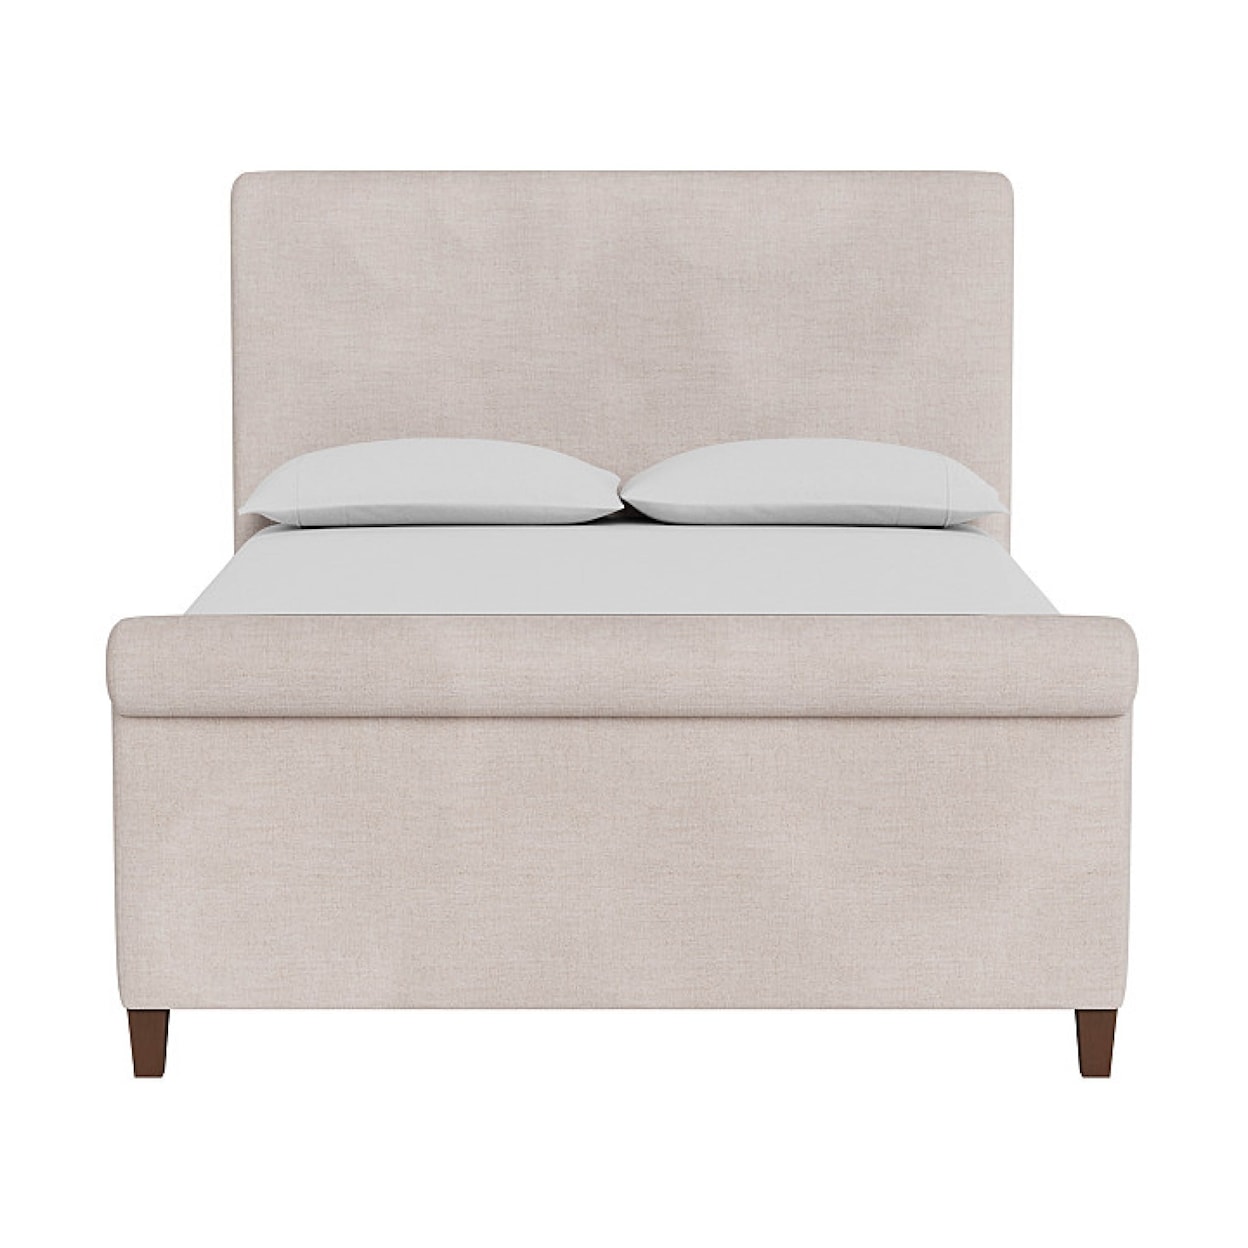 Universal Special Order Twin Cape May Bed